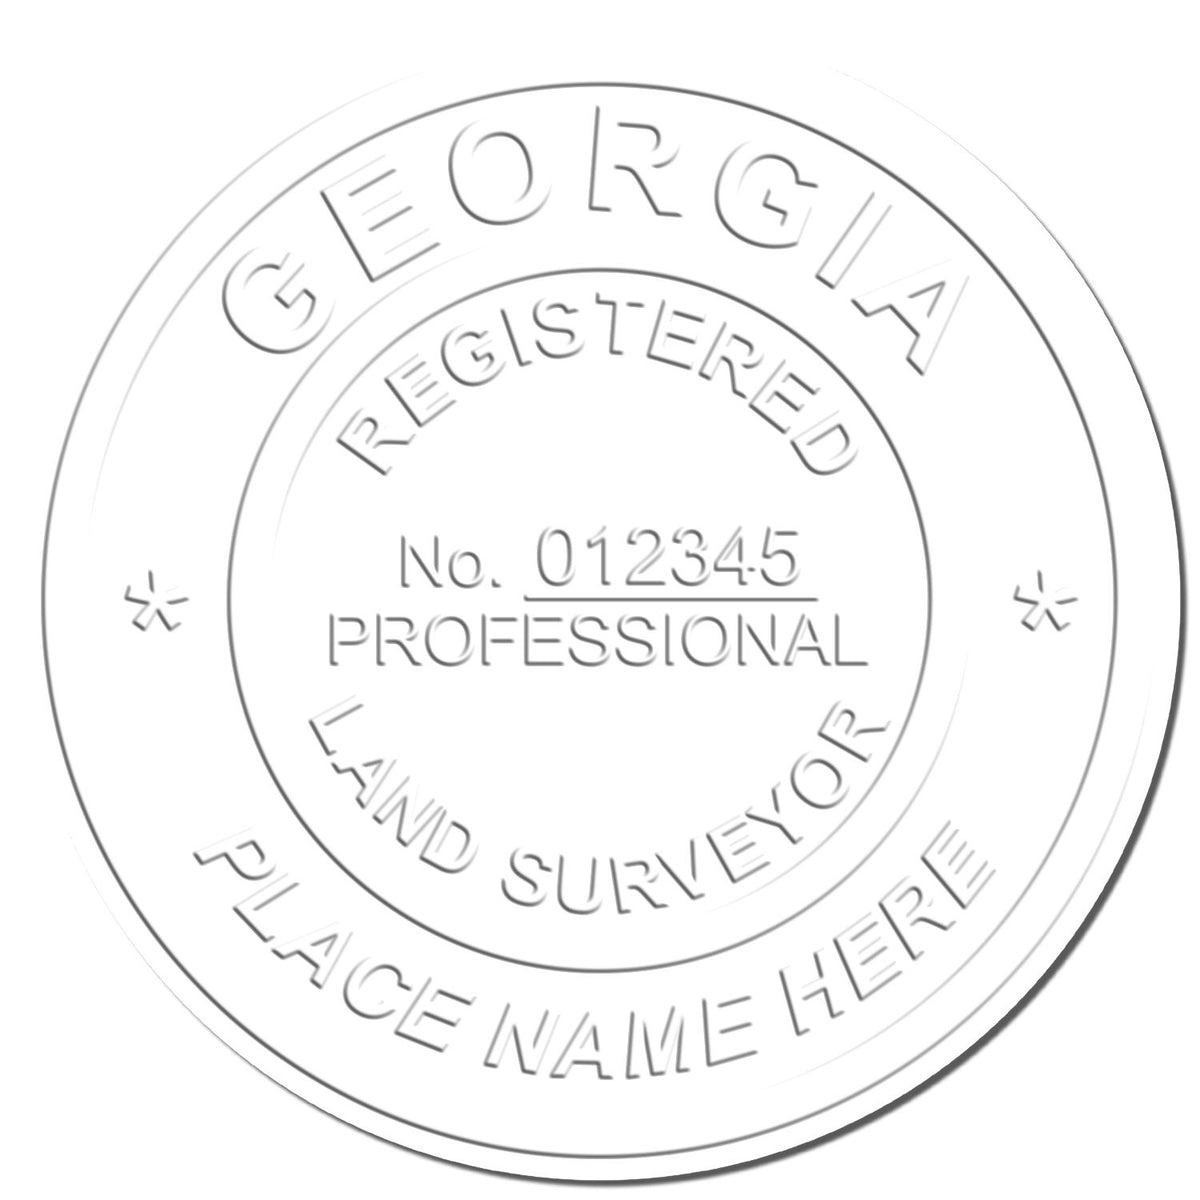 This paper is stamped with a sample imprint of the Extended Long Reach Georgia Surveyor Embosser, signifying its quality and reliability.